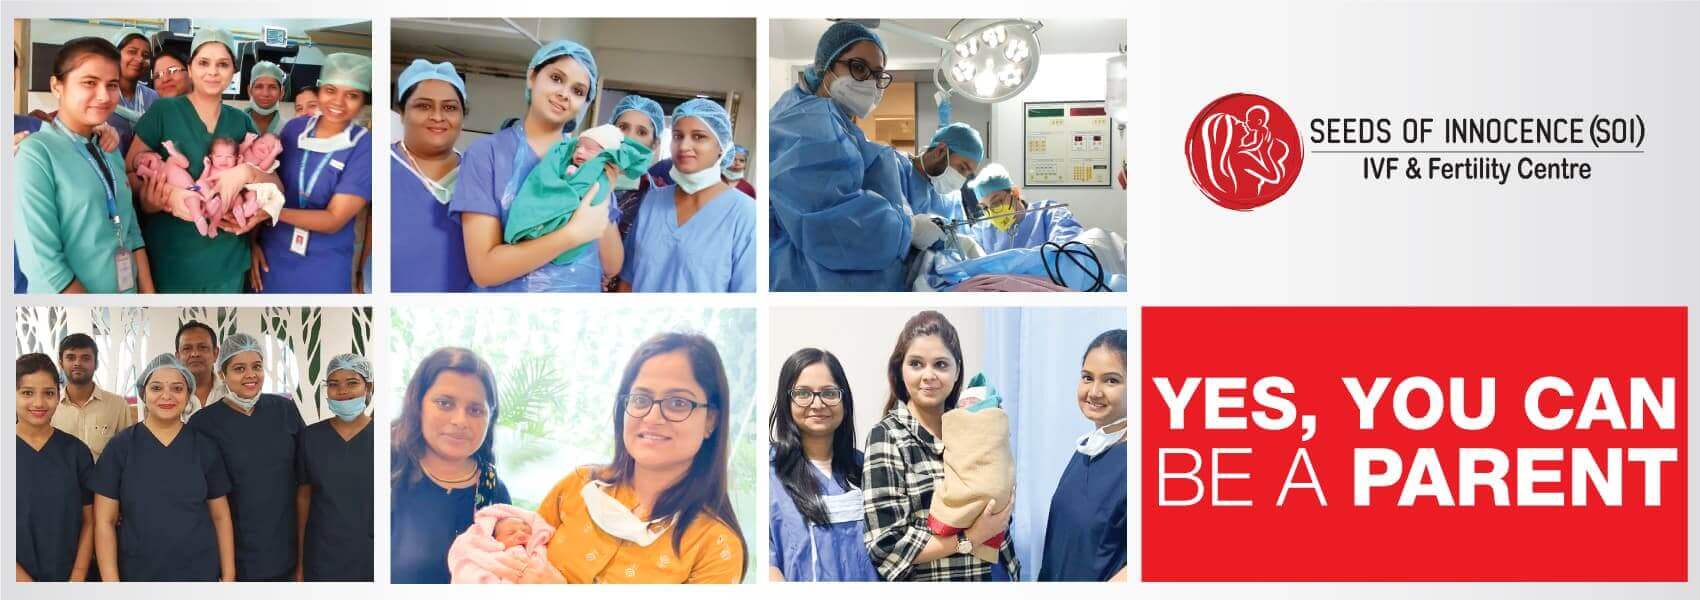 Best Hospital in Ghaziabad & Delhi NCR for Treatment of IVF & Inertility